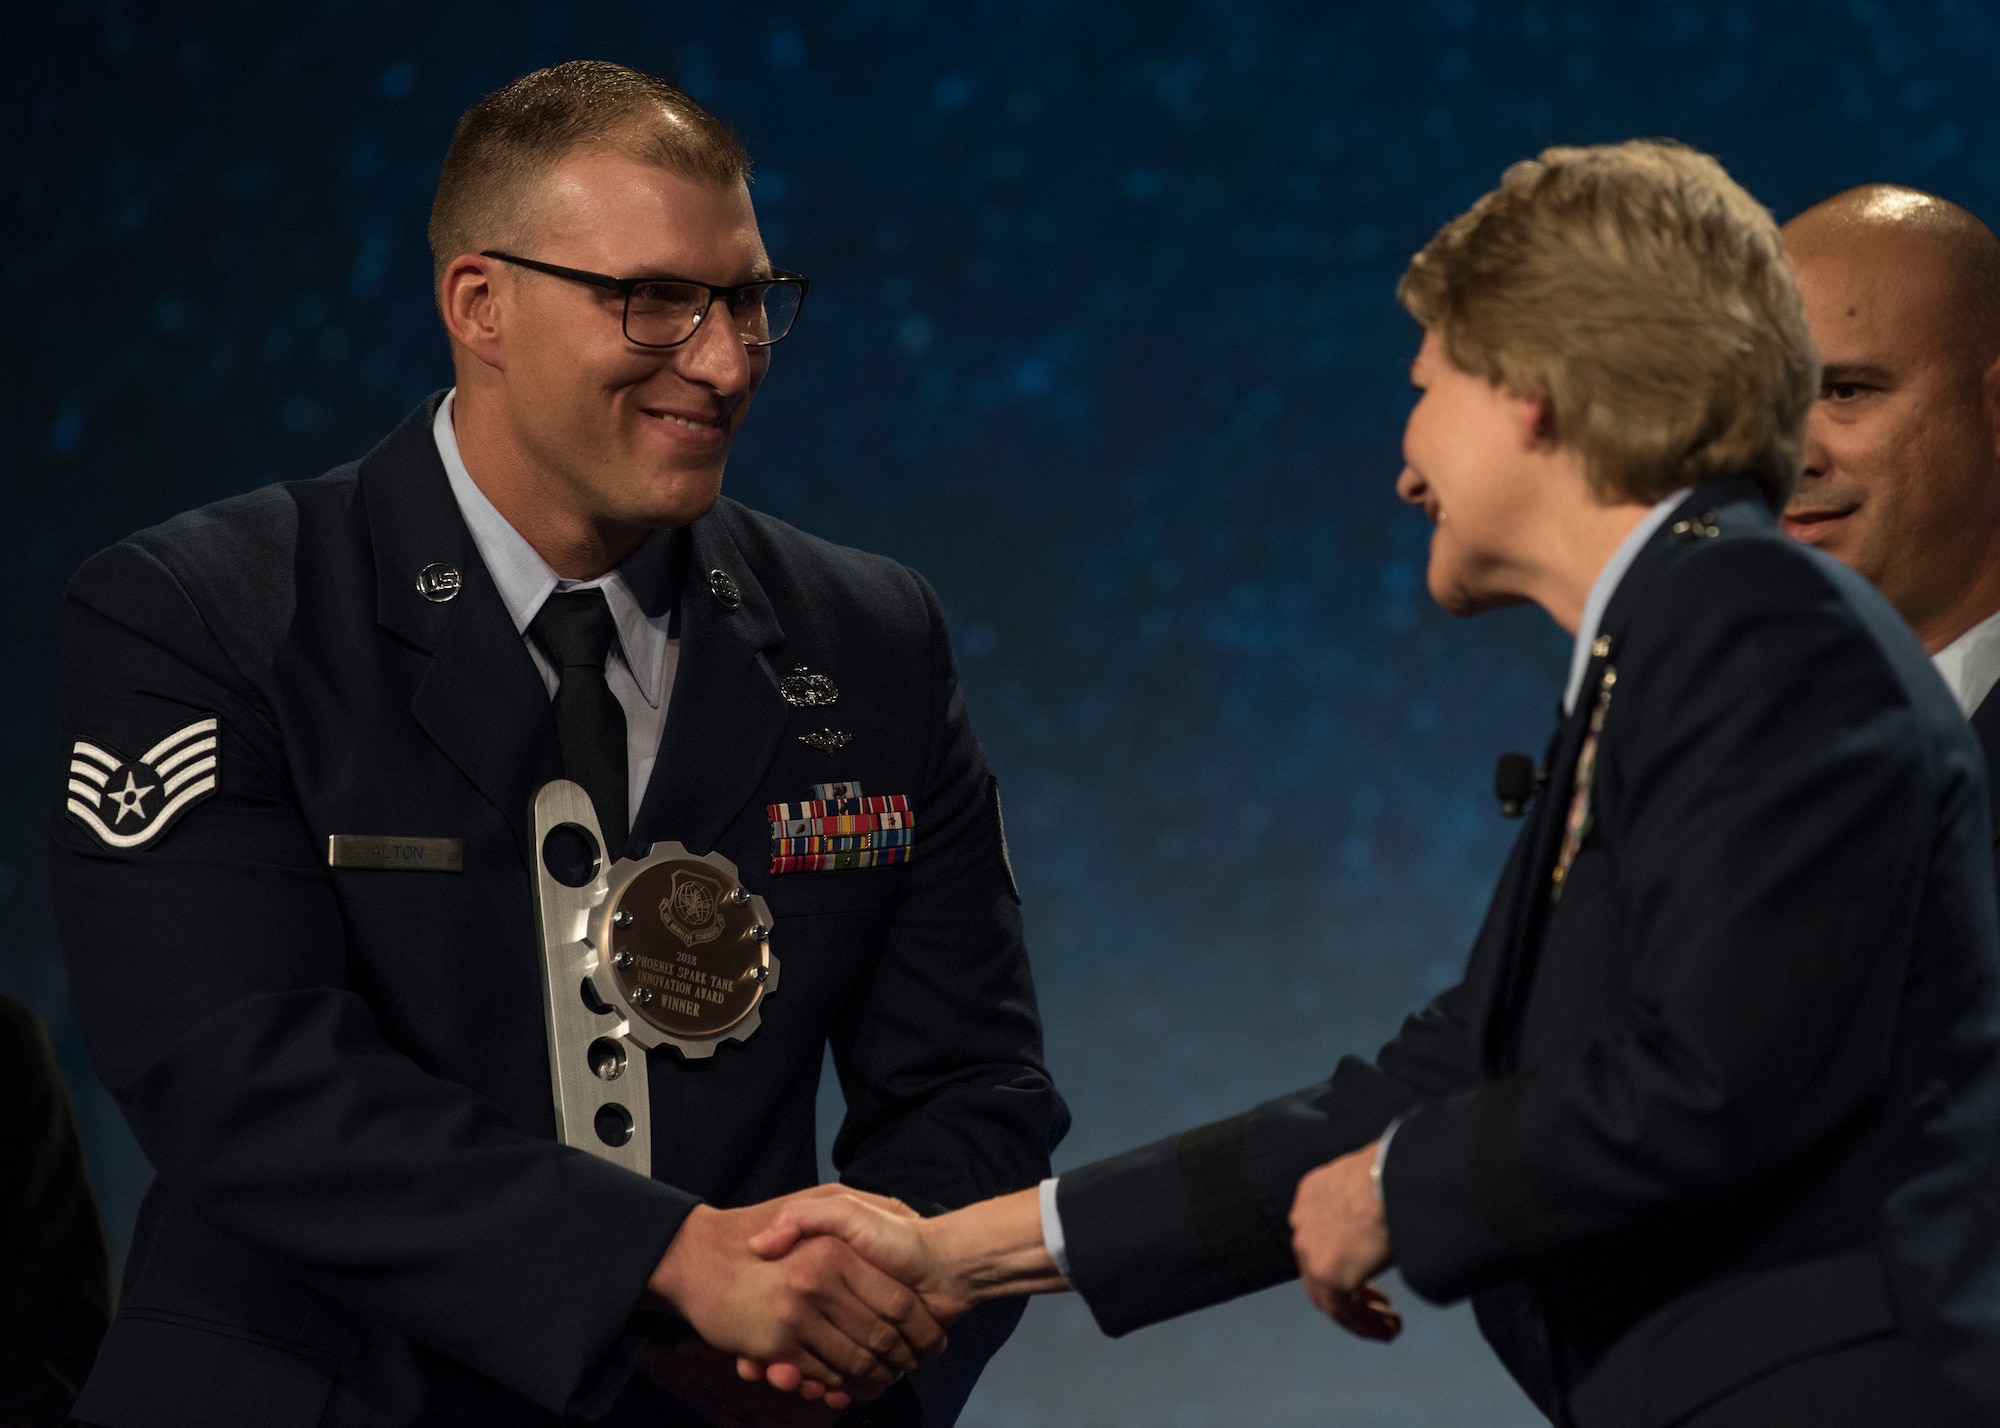 Gen. Maryanne Miller, Air Mobility Command commander, congratulates the winner of the 2018 AMC Phoenix Spark Tank competition, Staff Sgt. Travis Alton from the 19th Logistics Readiness Squadron, during the Airlift/Tanker Association Symposium in Grapevine, Texas, Oct. 27, 2018.